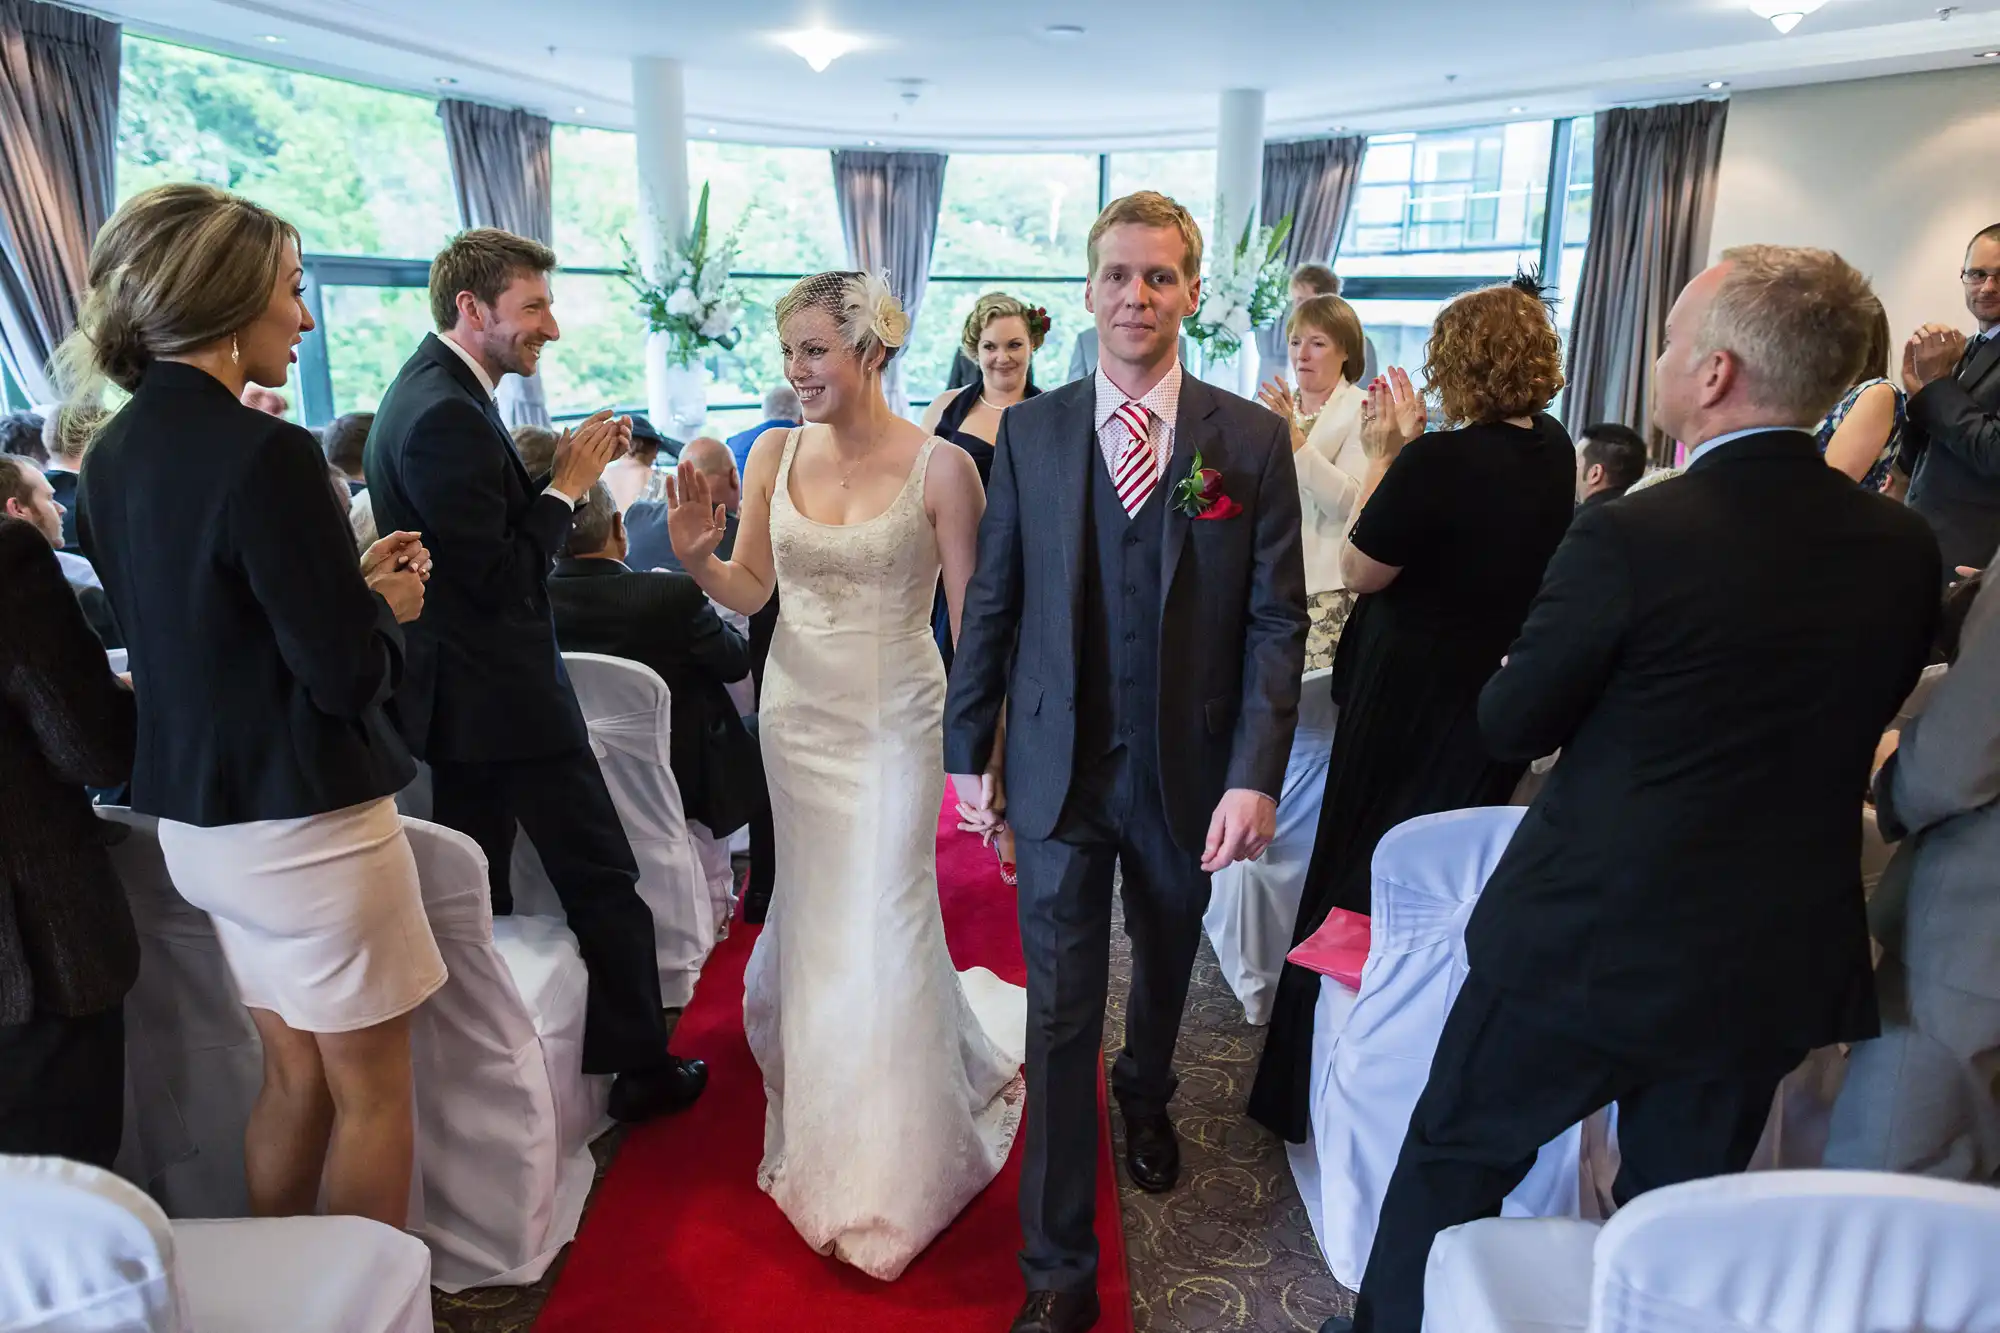 Bride and groom walking down the aisle, surrounded by applauding guests in an indoor wedding venue.